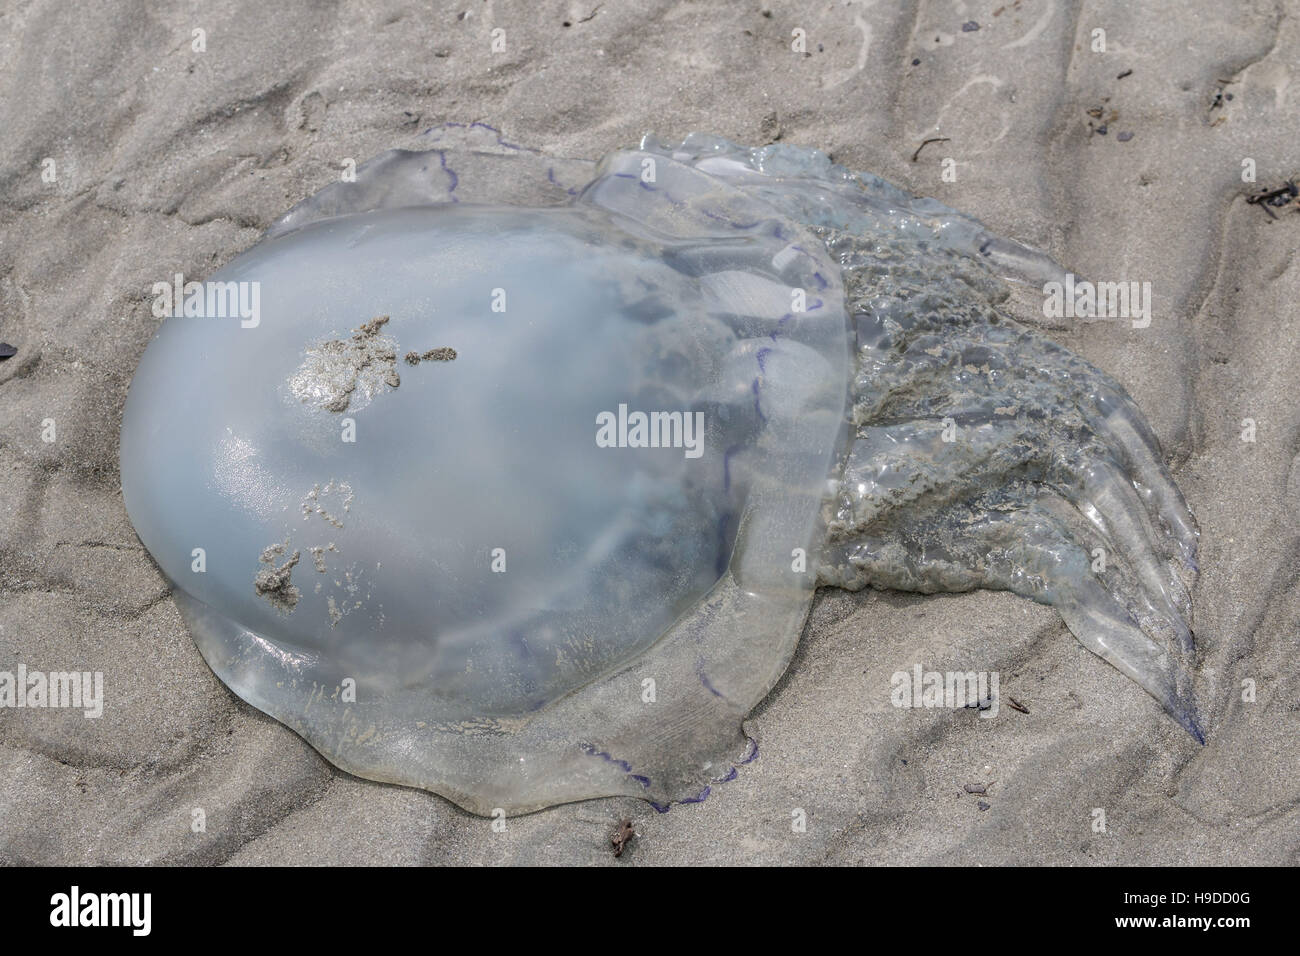 Jellyfish washed up in the bay of Le Mont Saint-Michel (St Michael's Mount, Normandy, north-western France). Stock Photo